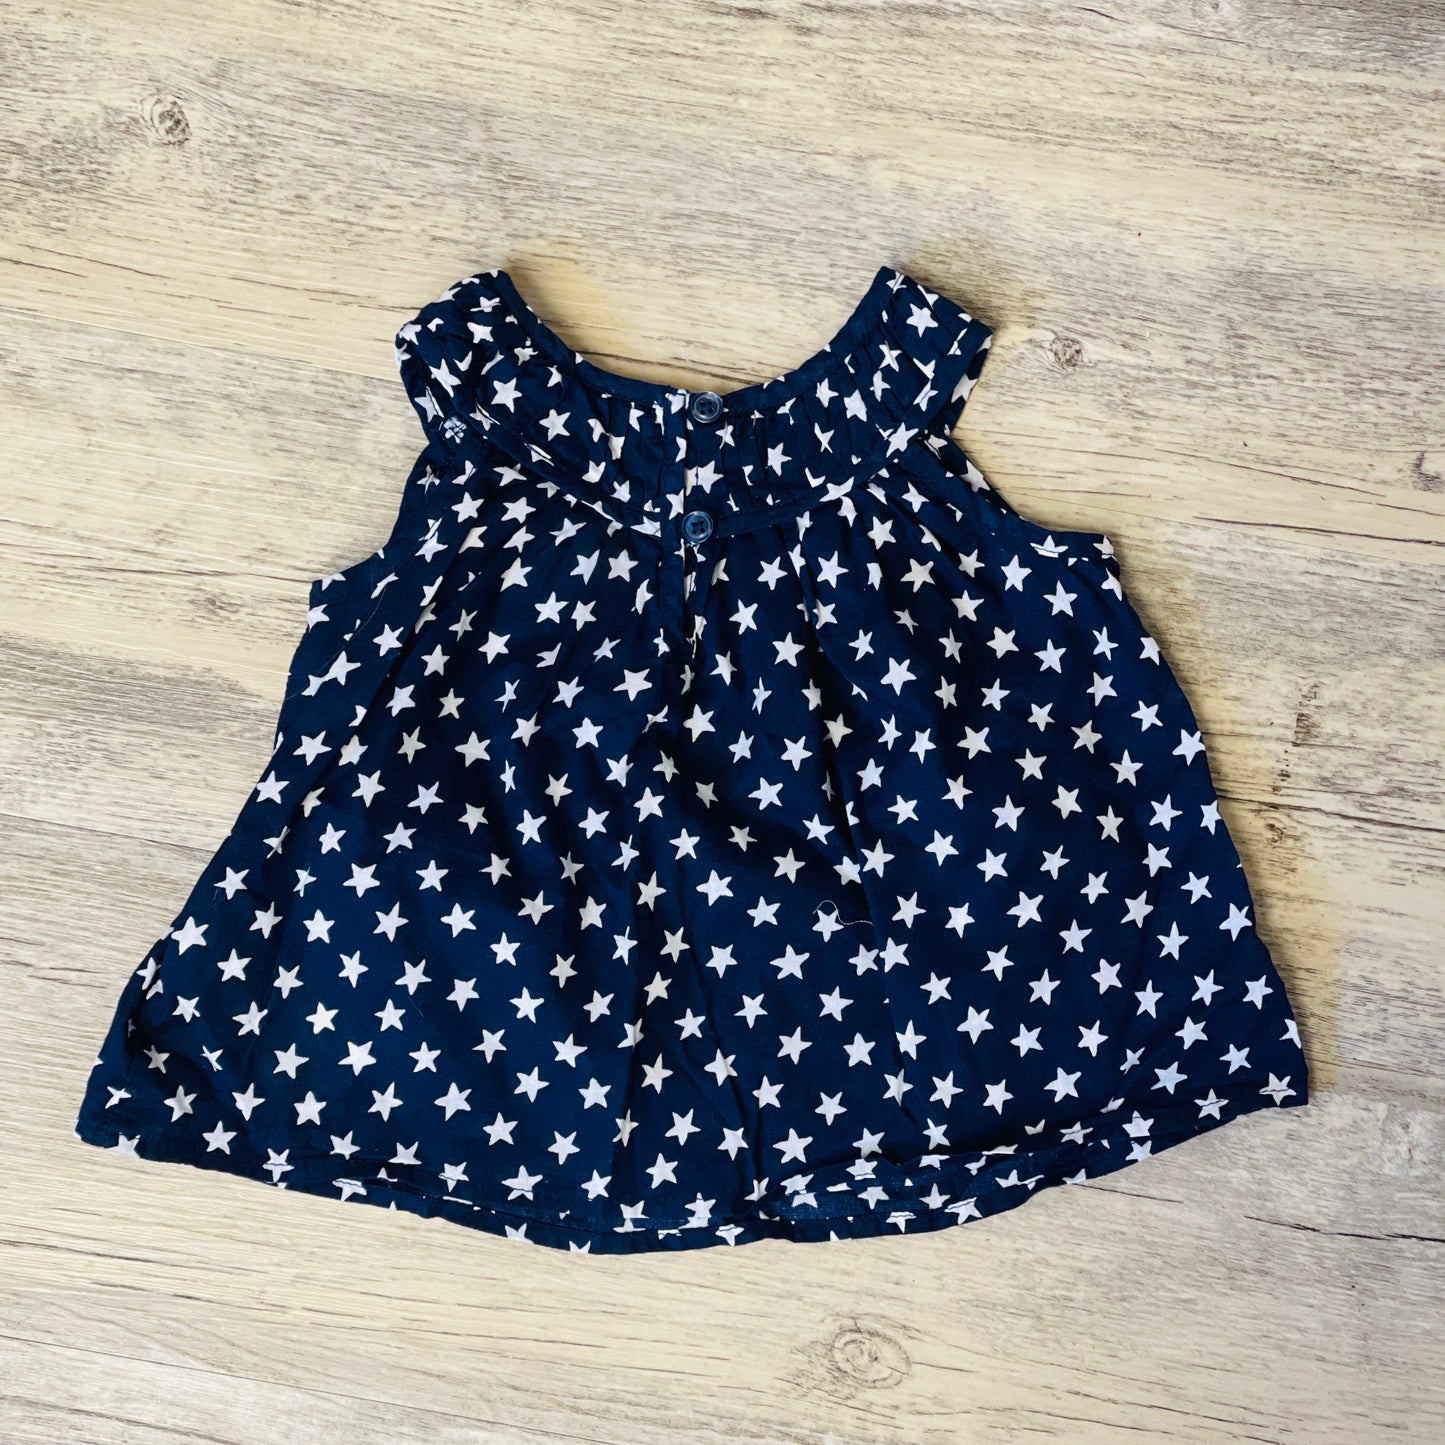 Old Navy Blue and White Stars High Neck Top - 6/12 Months